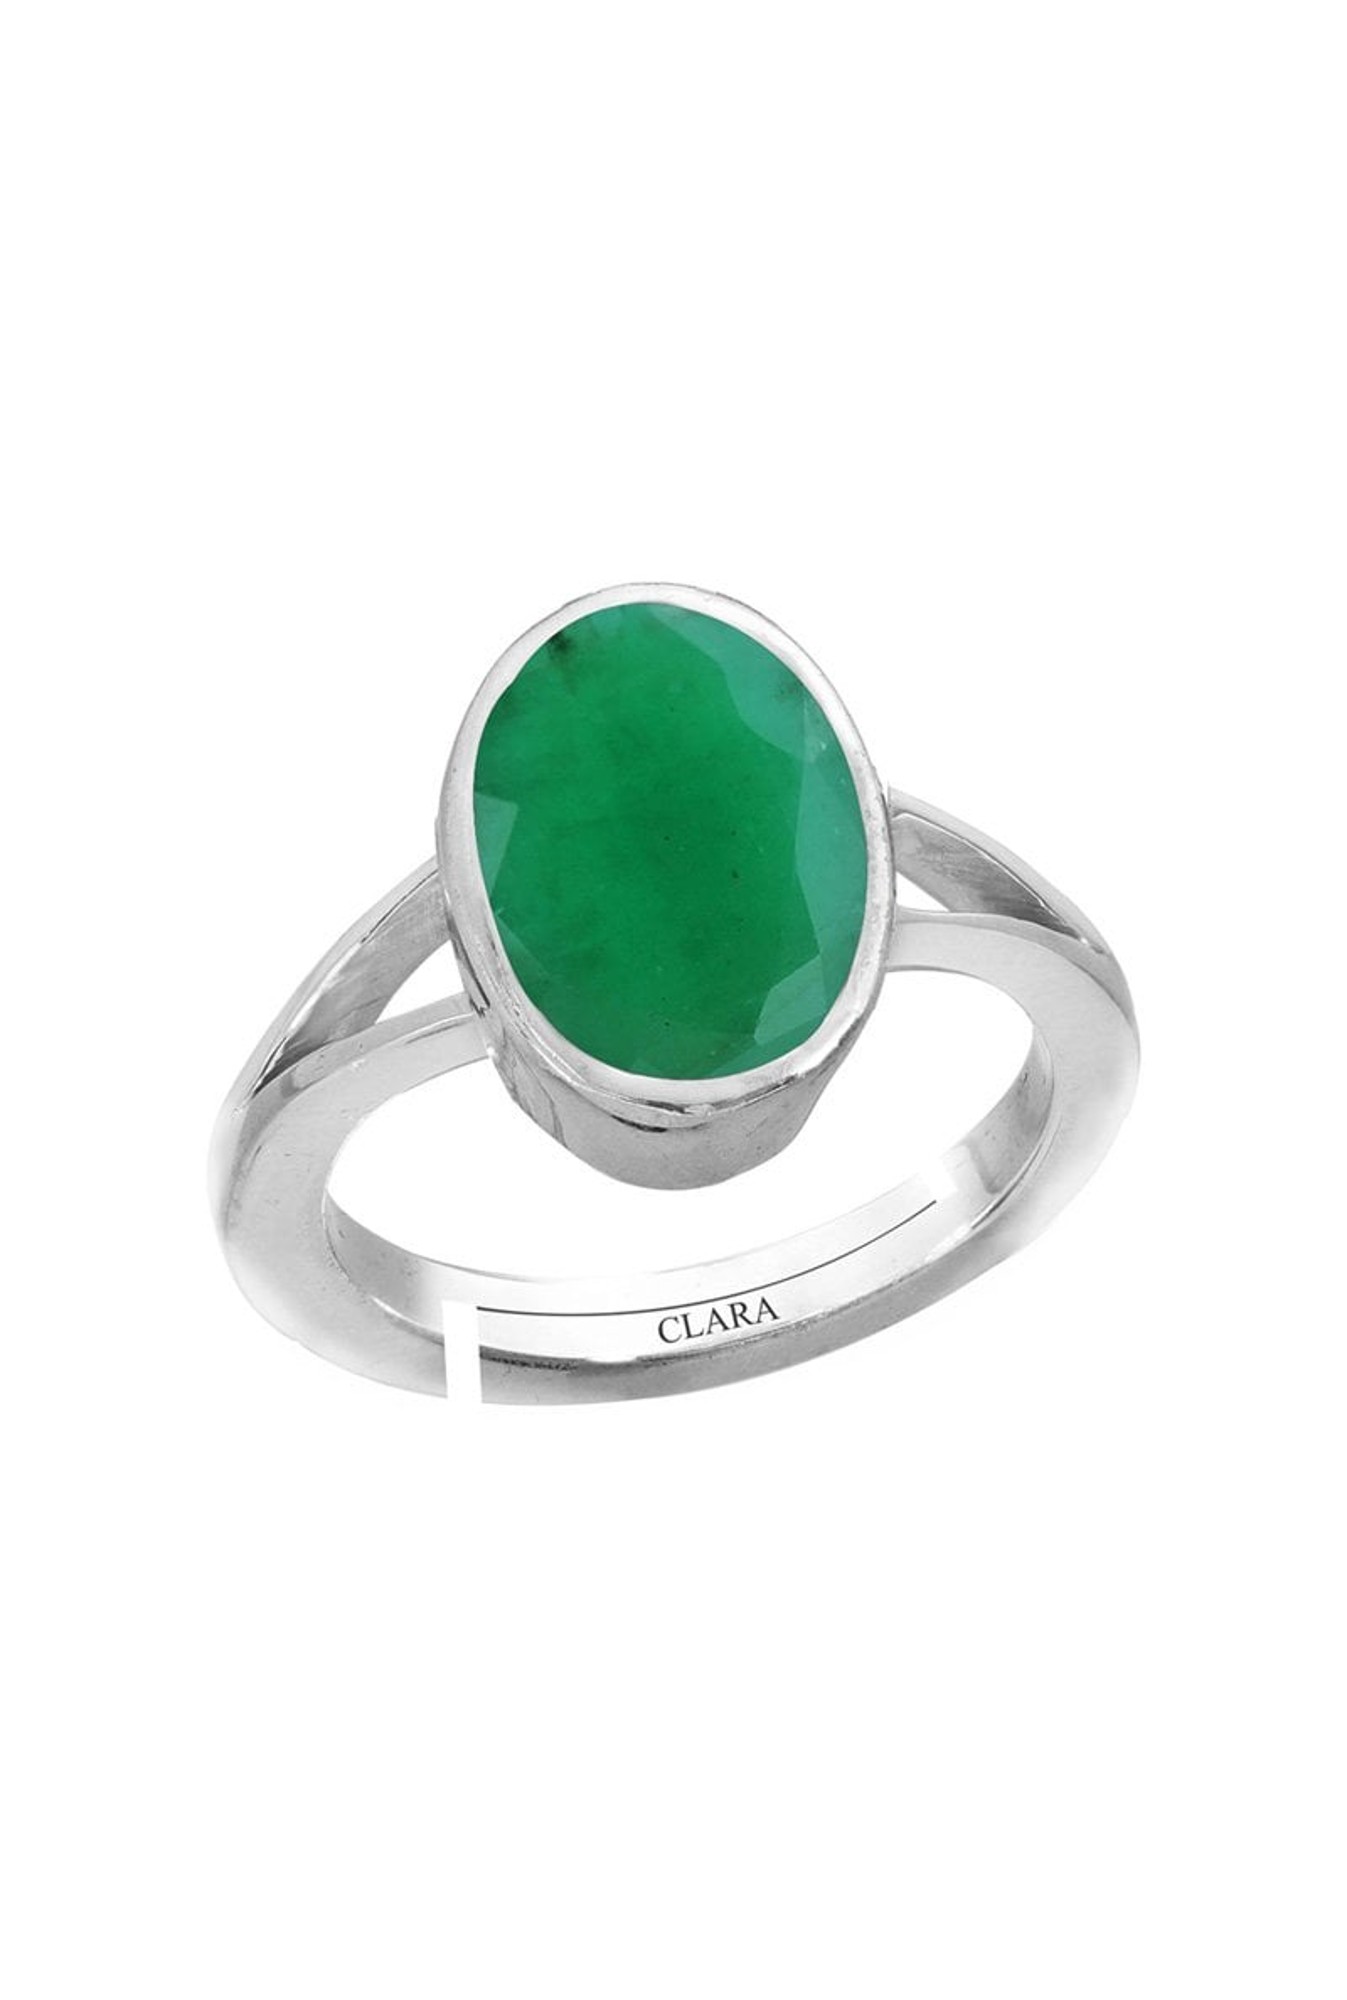 Men and Women Natural Oval Shape Green Emerald Zamrud Panna Ring in  Sterling Silver 925 Ring Handmade Ring - Etsy Sweden